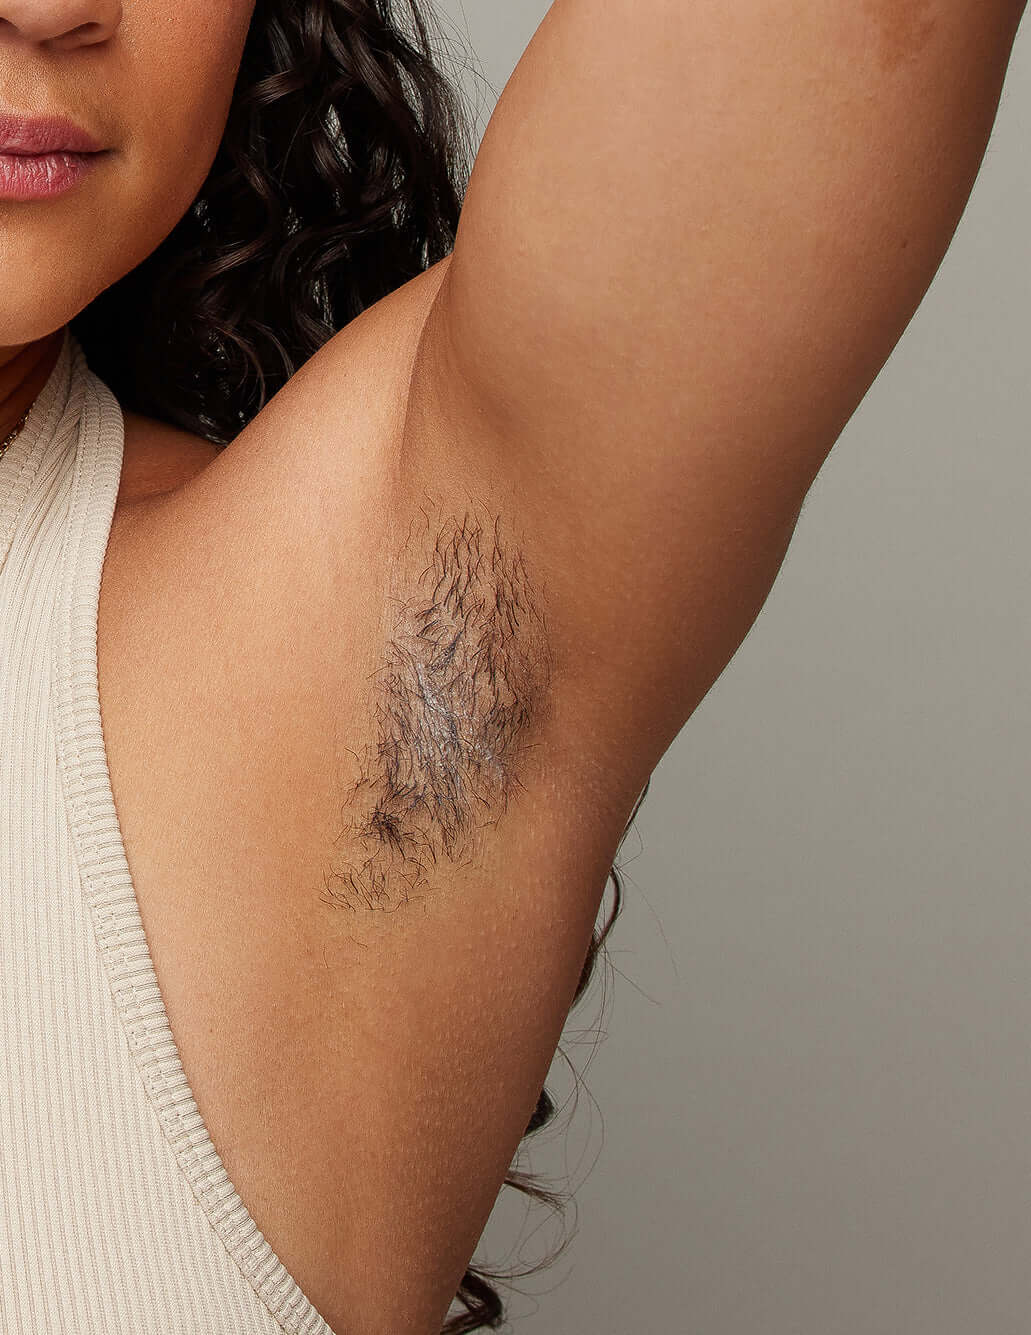 Effective IPL Hair Removal for Underarm area with Ulike Air 